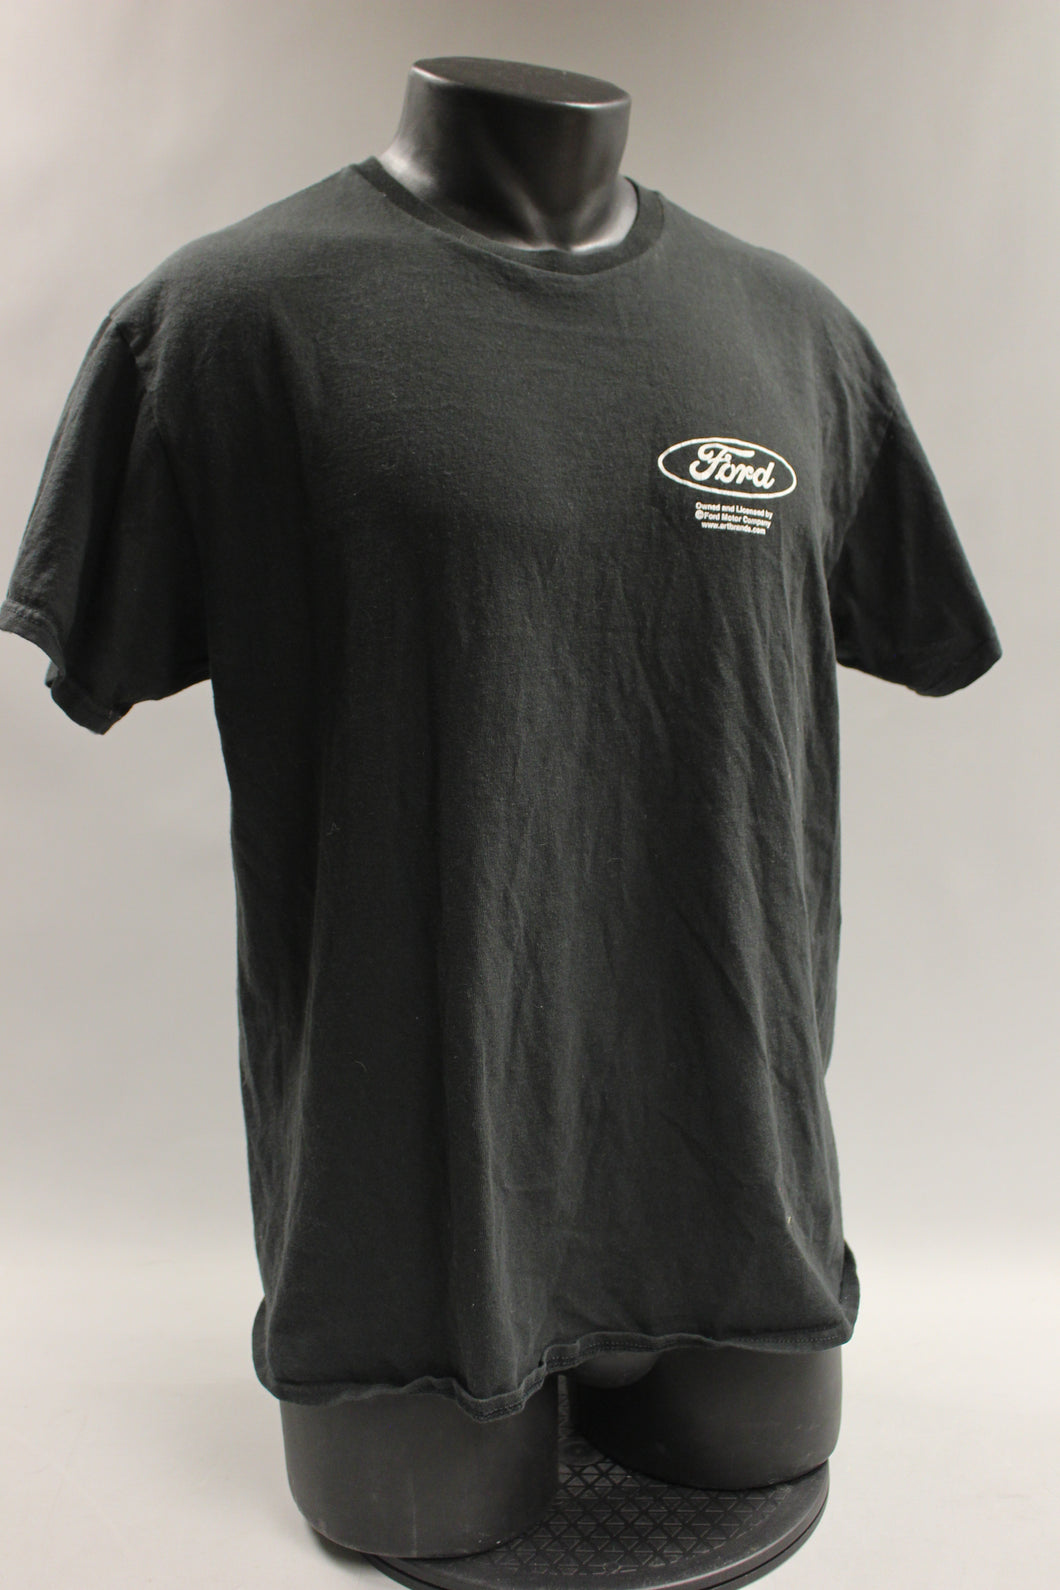 Ford Mustang Boss 302 Unisex Shirt Size Large -Black -Used